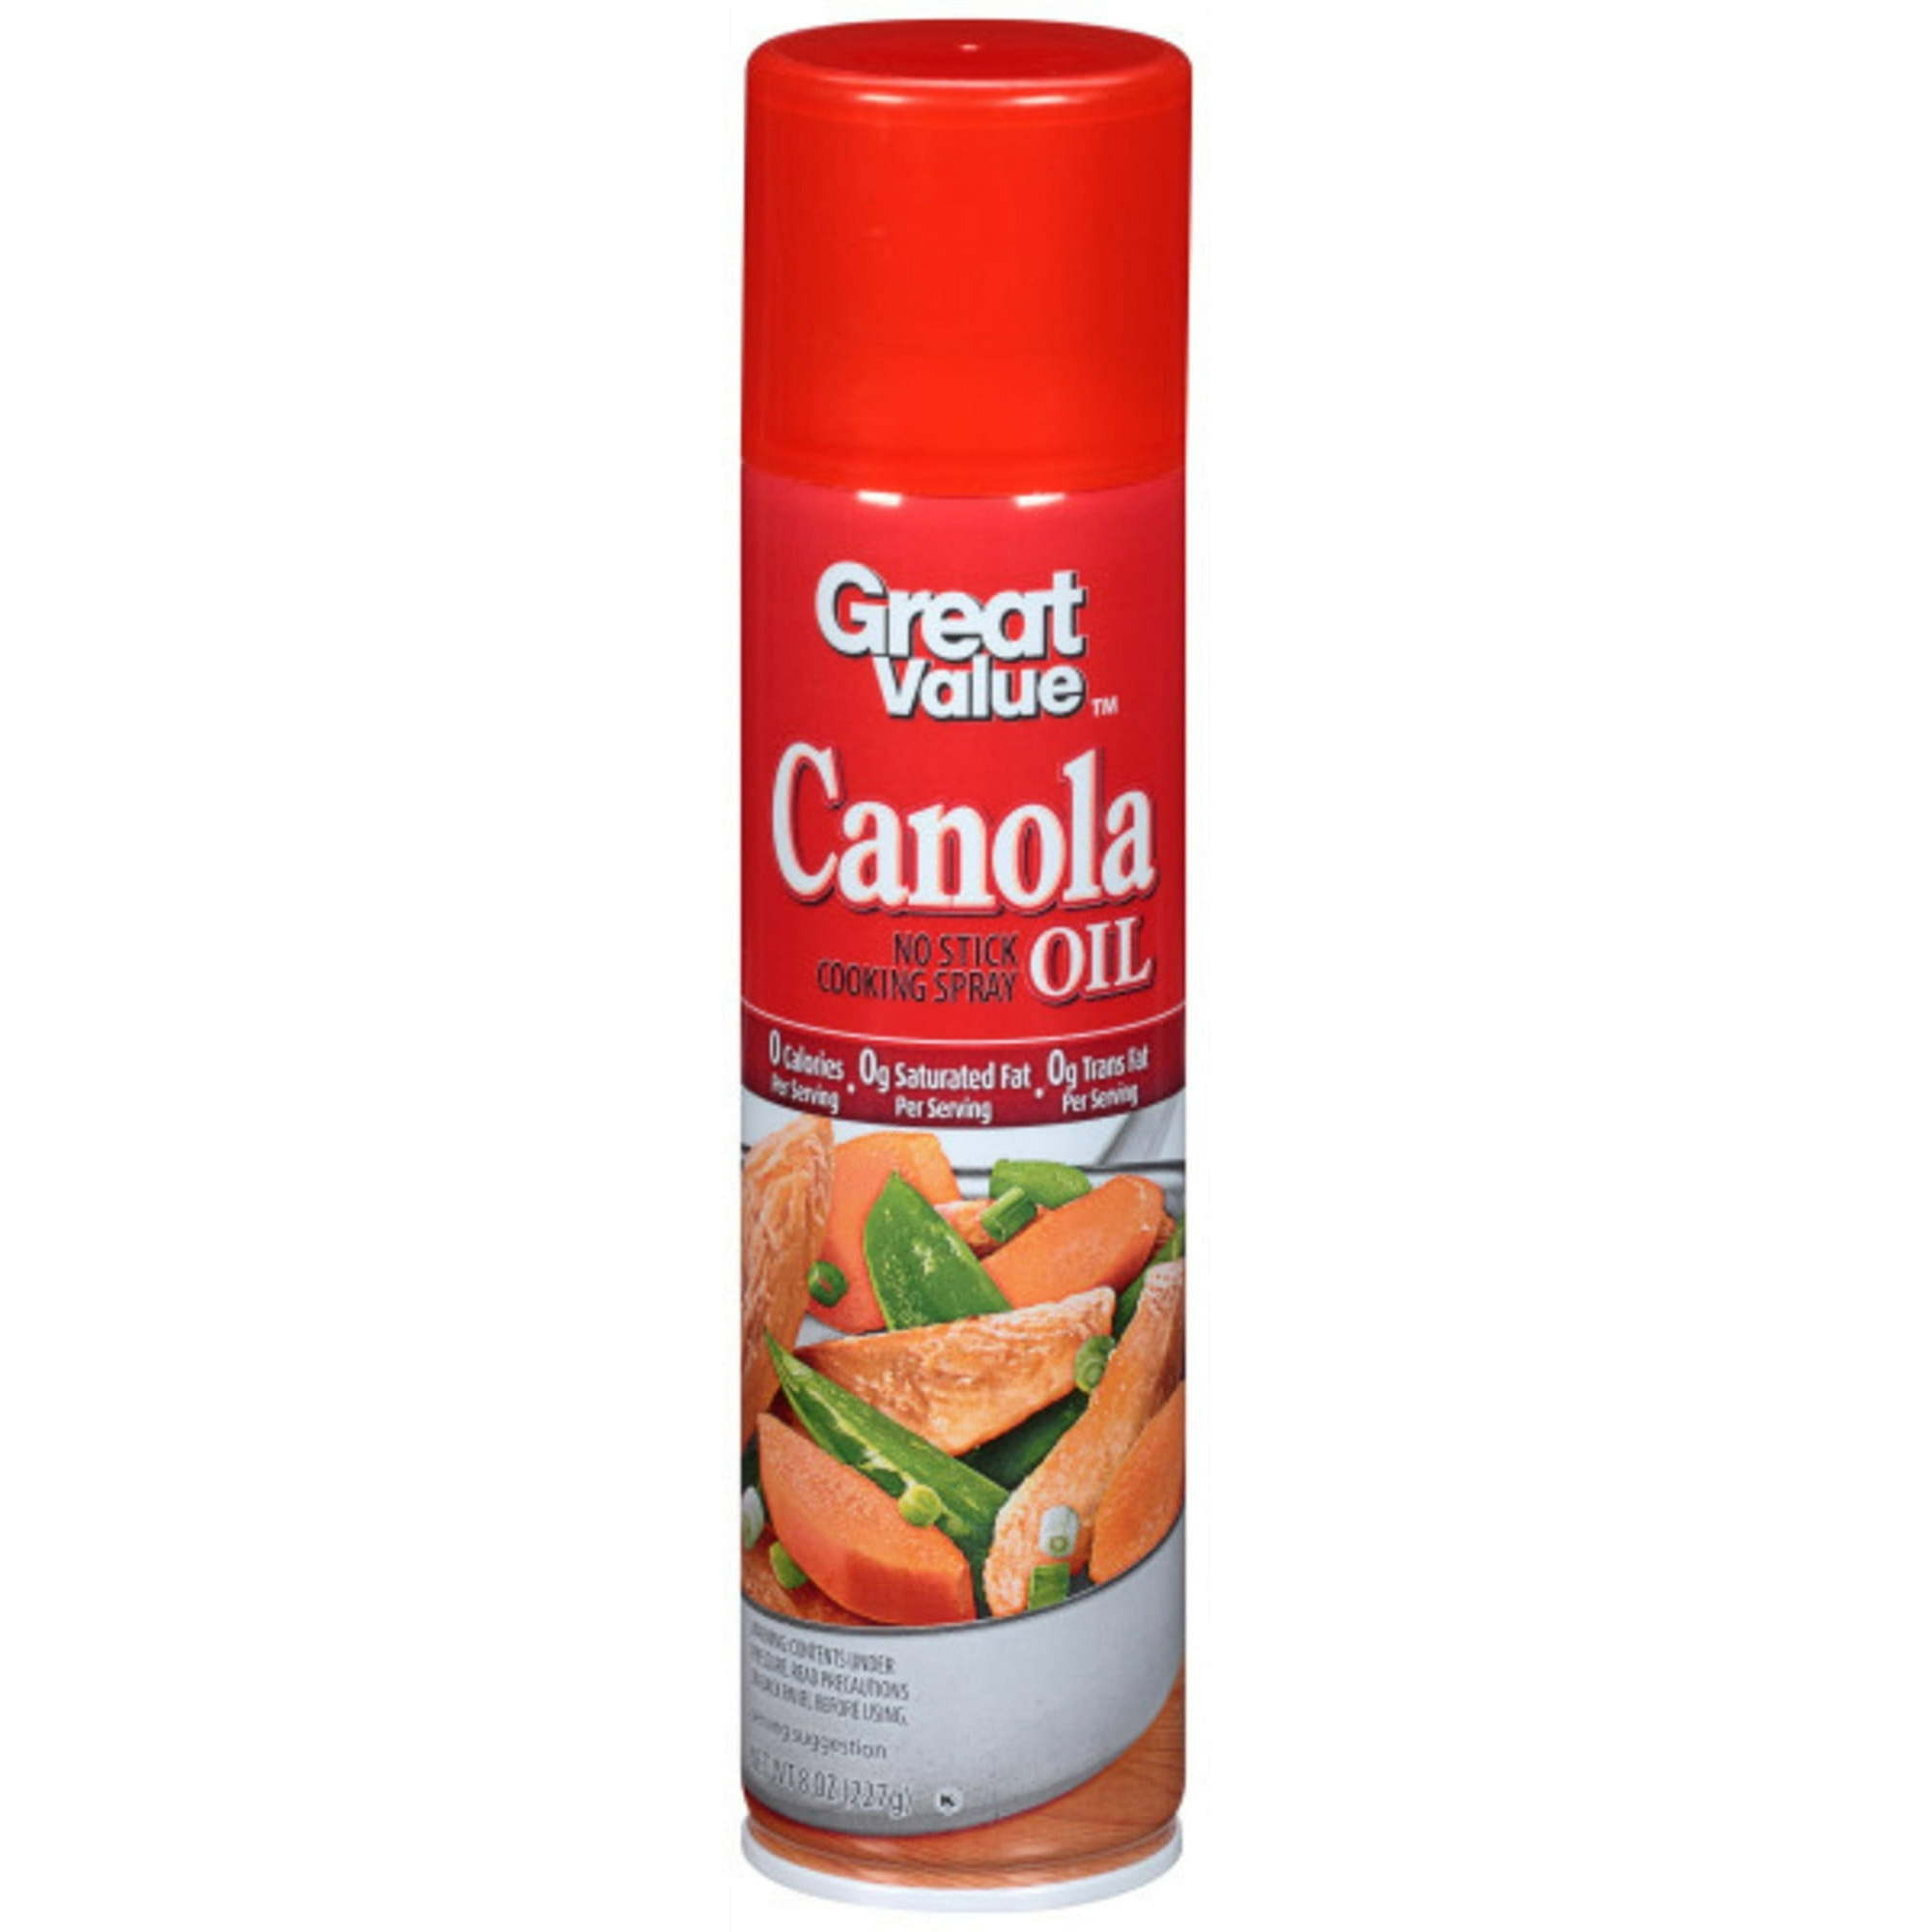 Case of 4 - Great Value Canola Oil Cooking Spray - 8 Oz (227 Gm)